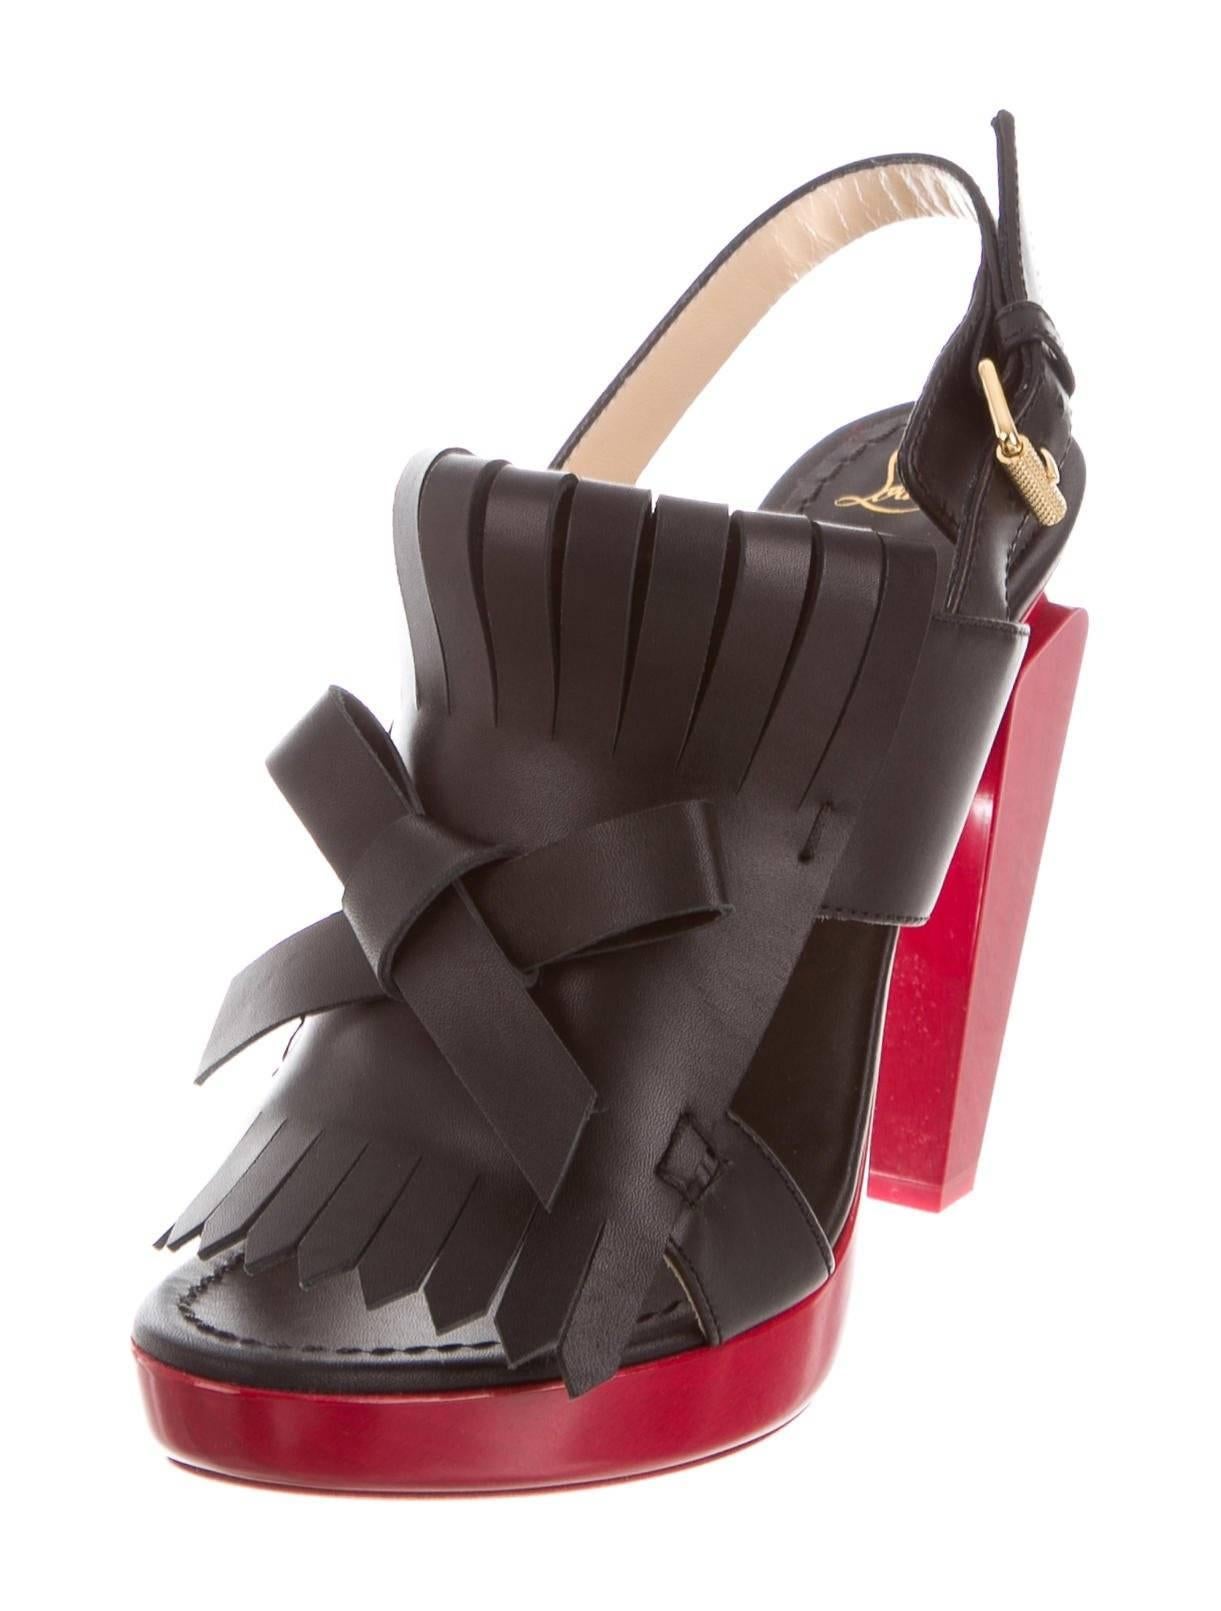 Christian Louboutin New Black Leather Red Heel Evening Sandals Heels in Box 

Size IT 36.5
Leather
Resin heel 
Ankle strap closure
Made in Italy
Heel height 5"
Includes original Christian Louboutin dust bag and box 